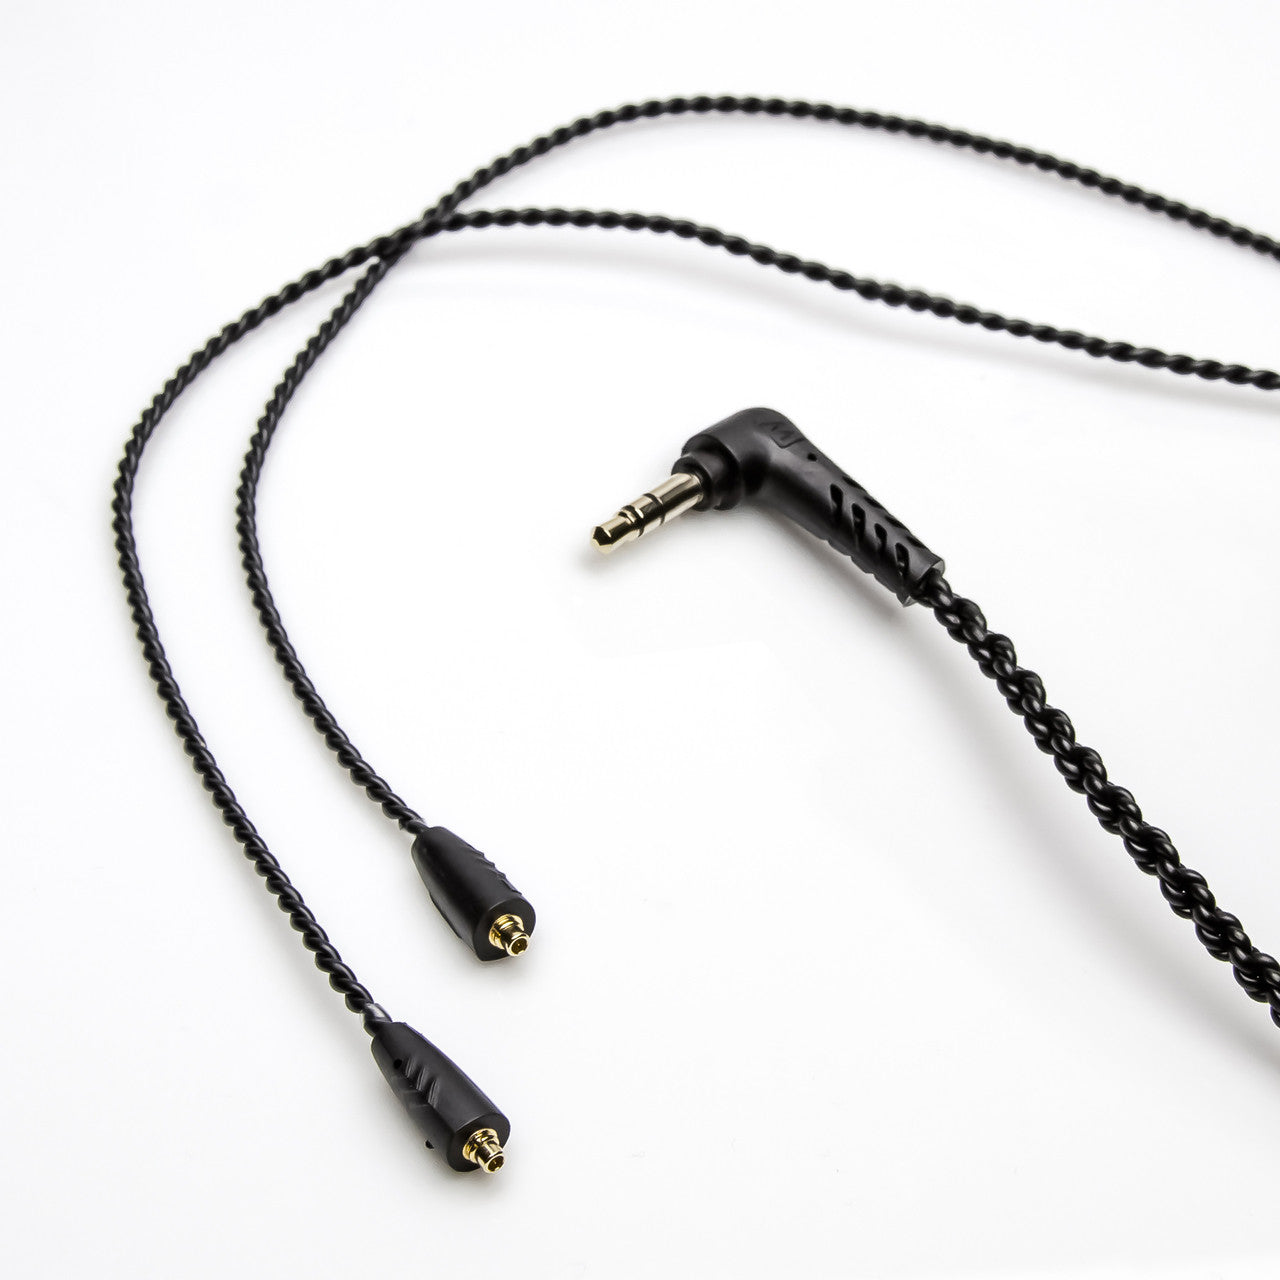 Image of MMCX Replacement Stereo Audio Cable.